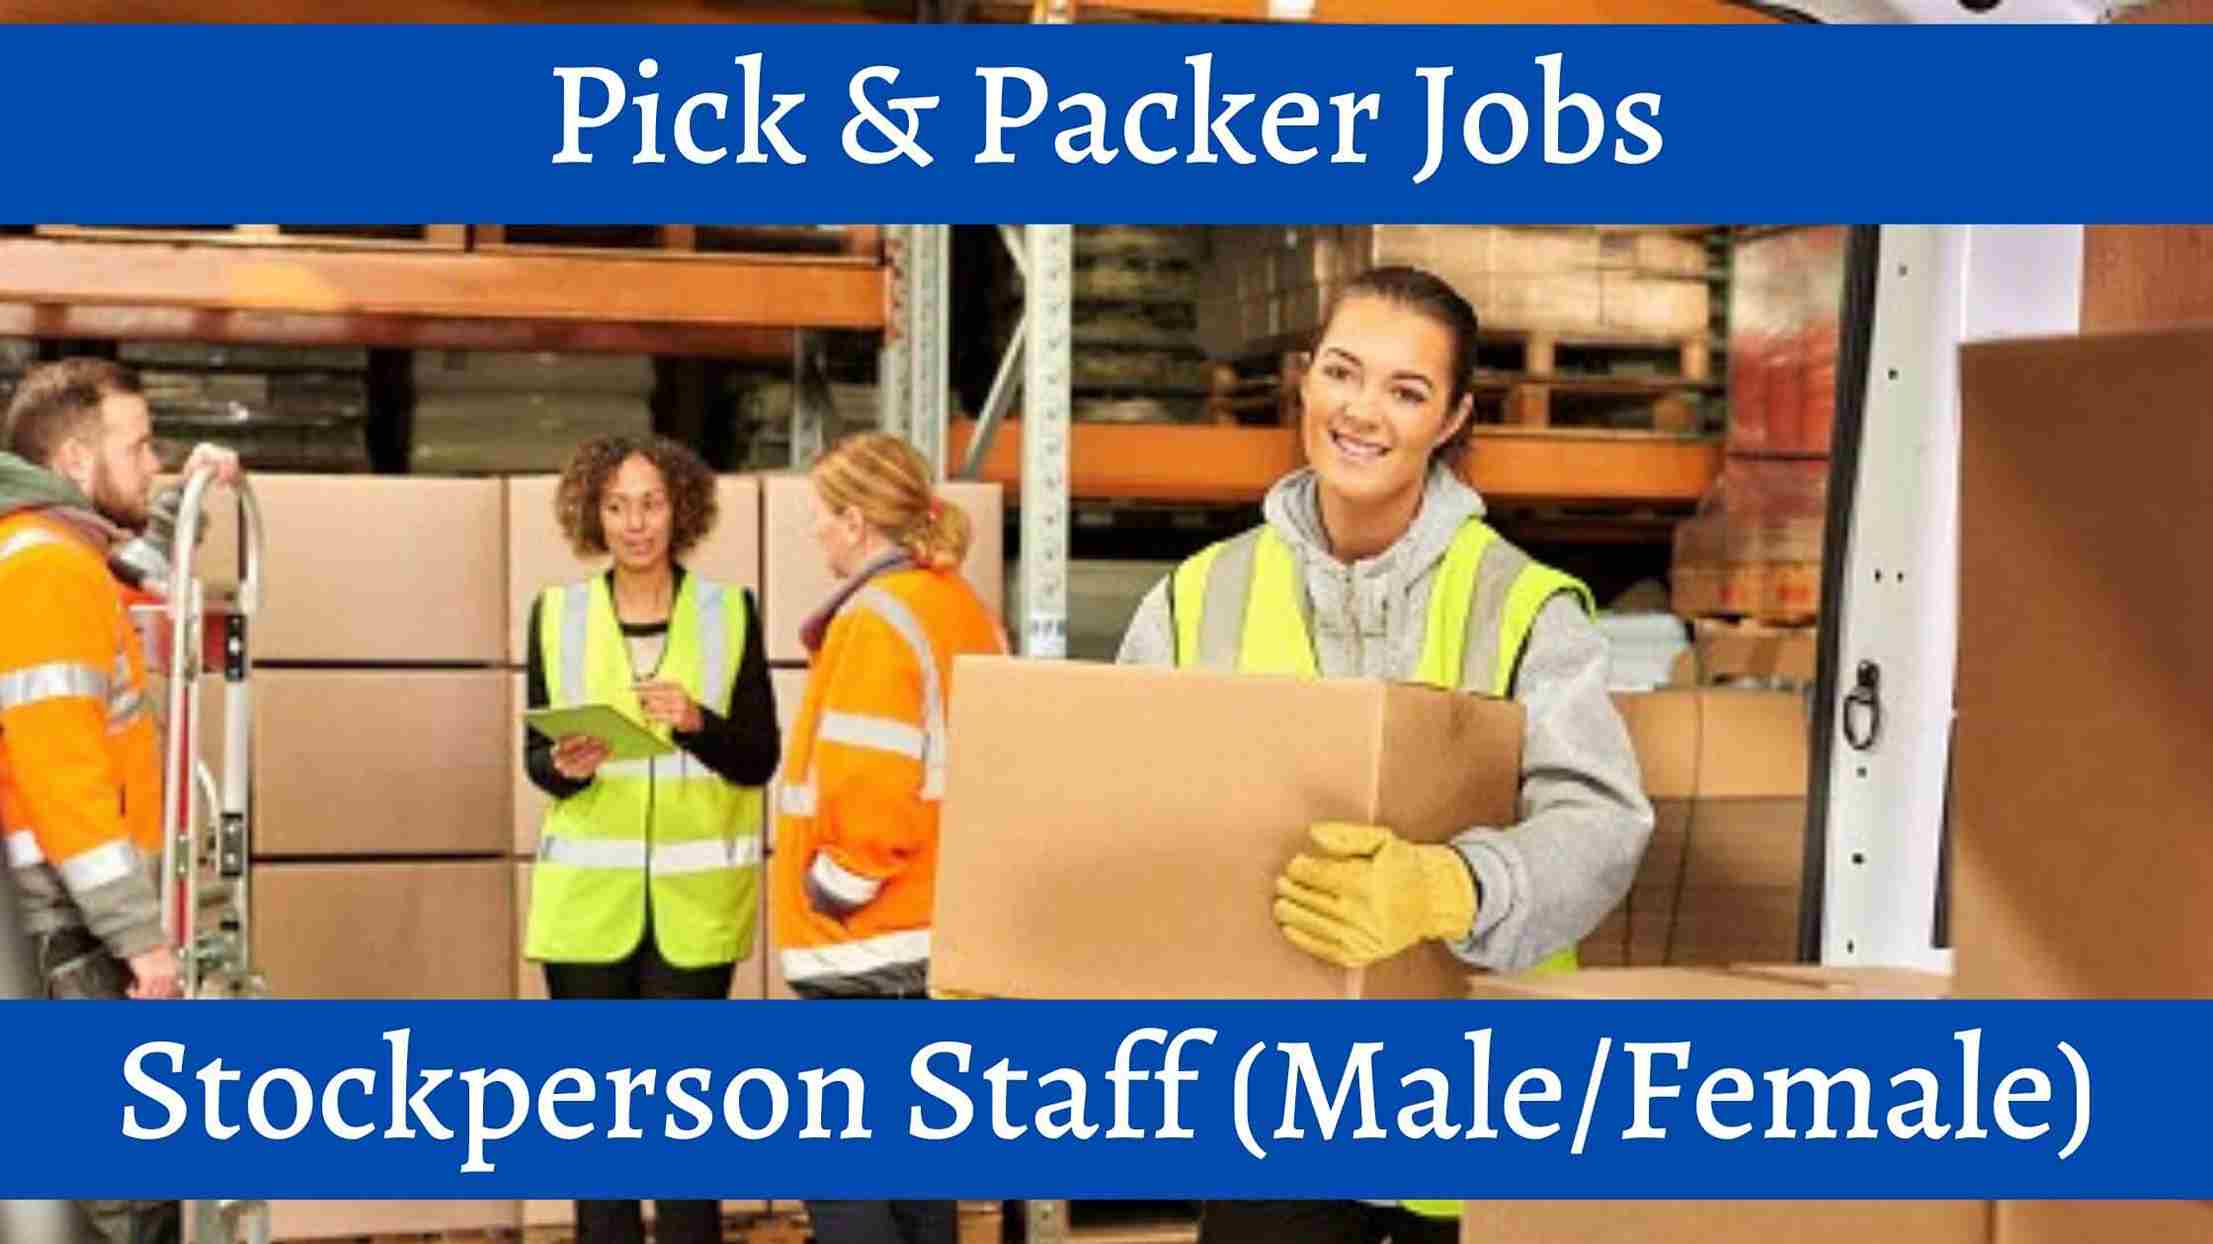 Stockperson Jobs, Pick and packer jobs in New Zealand